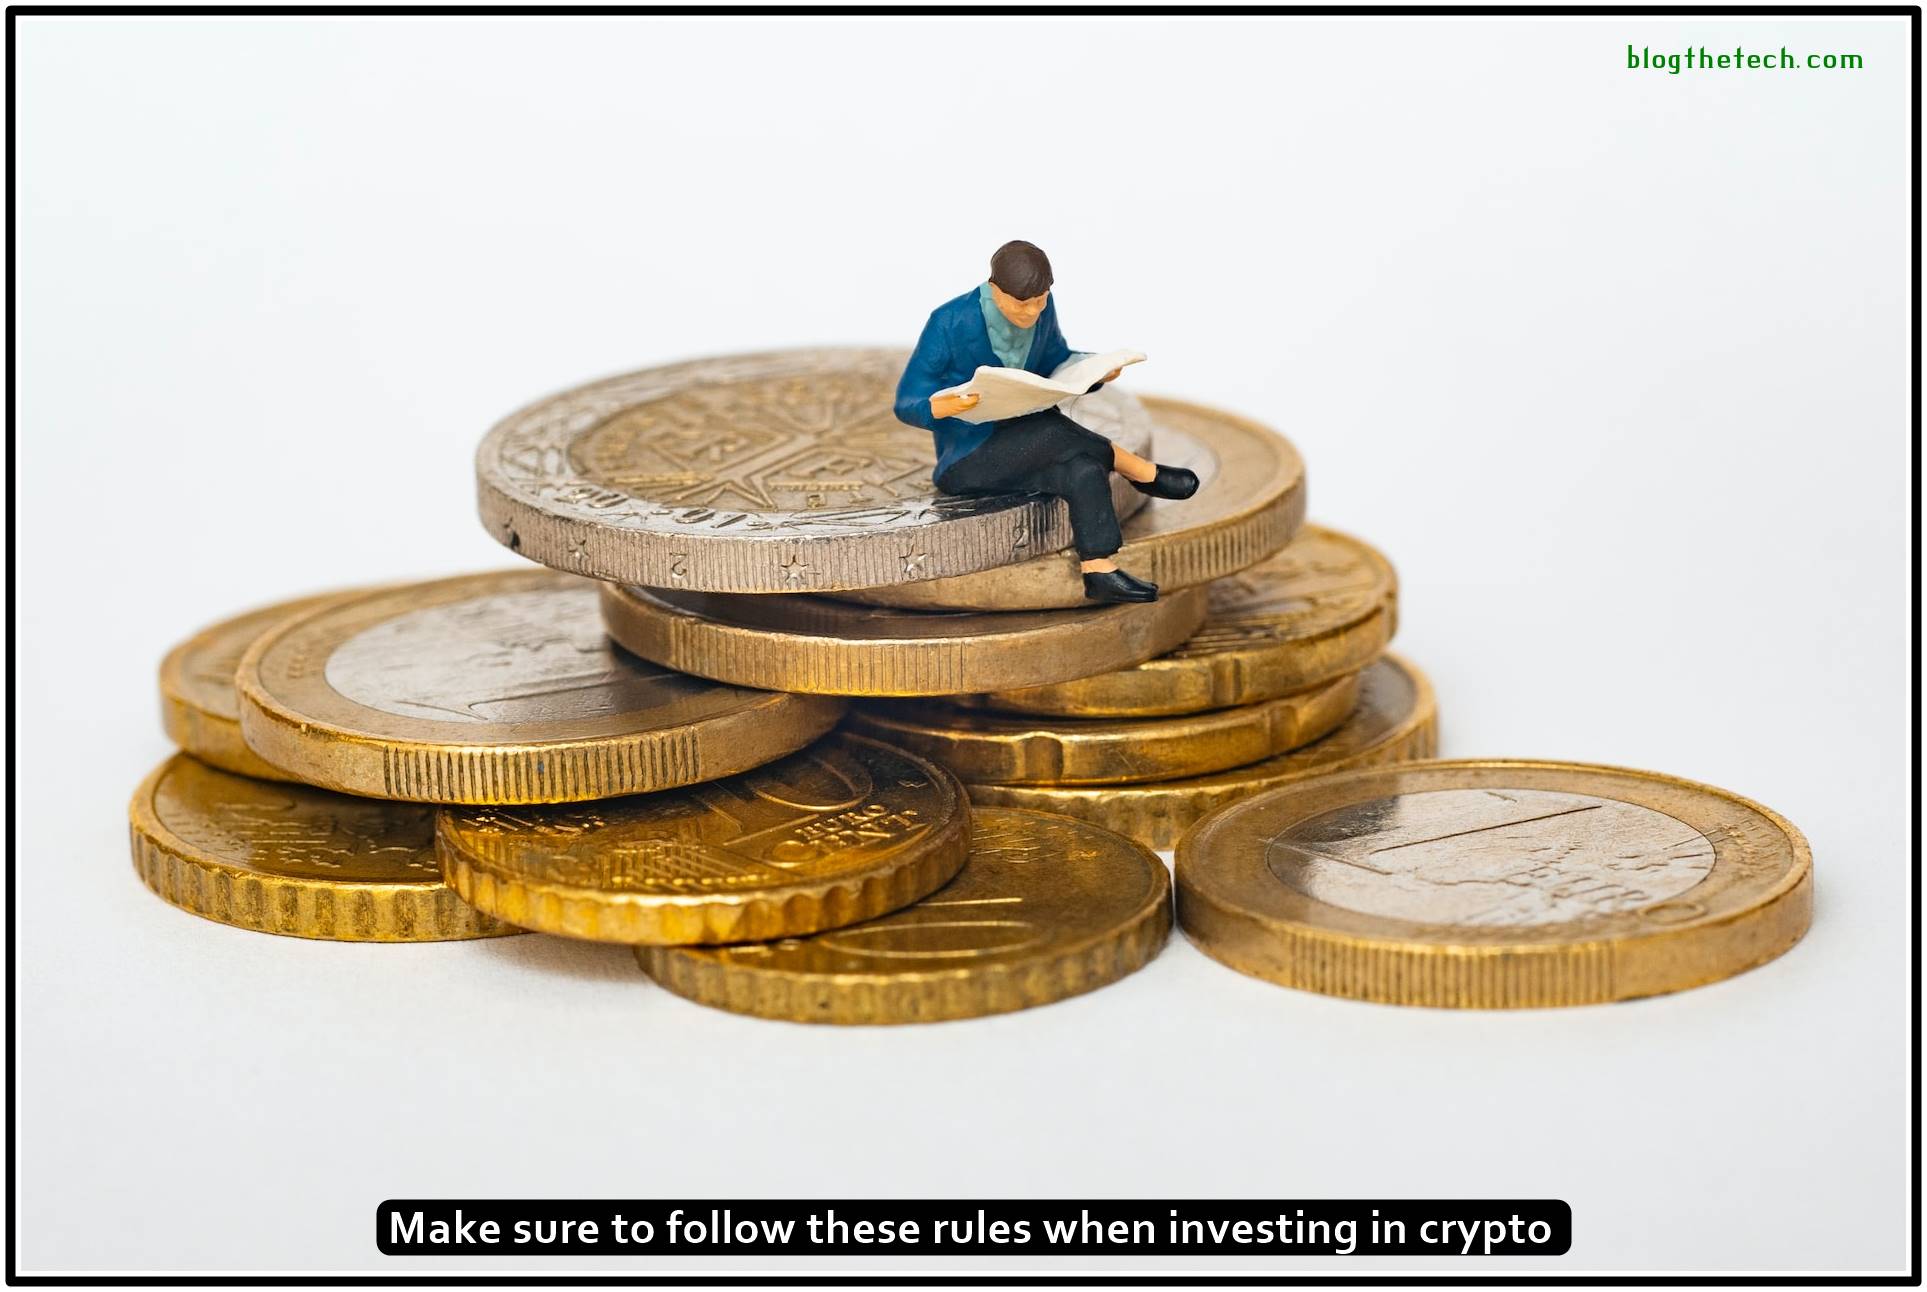 Make sure to follow these rules when investing in crypto